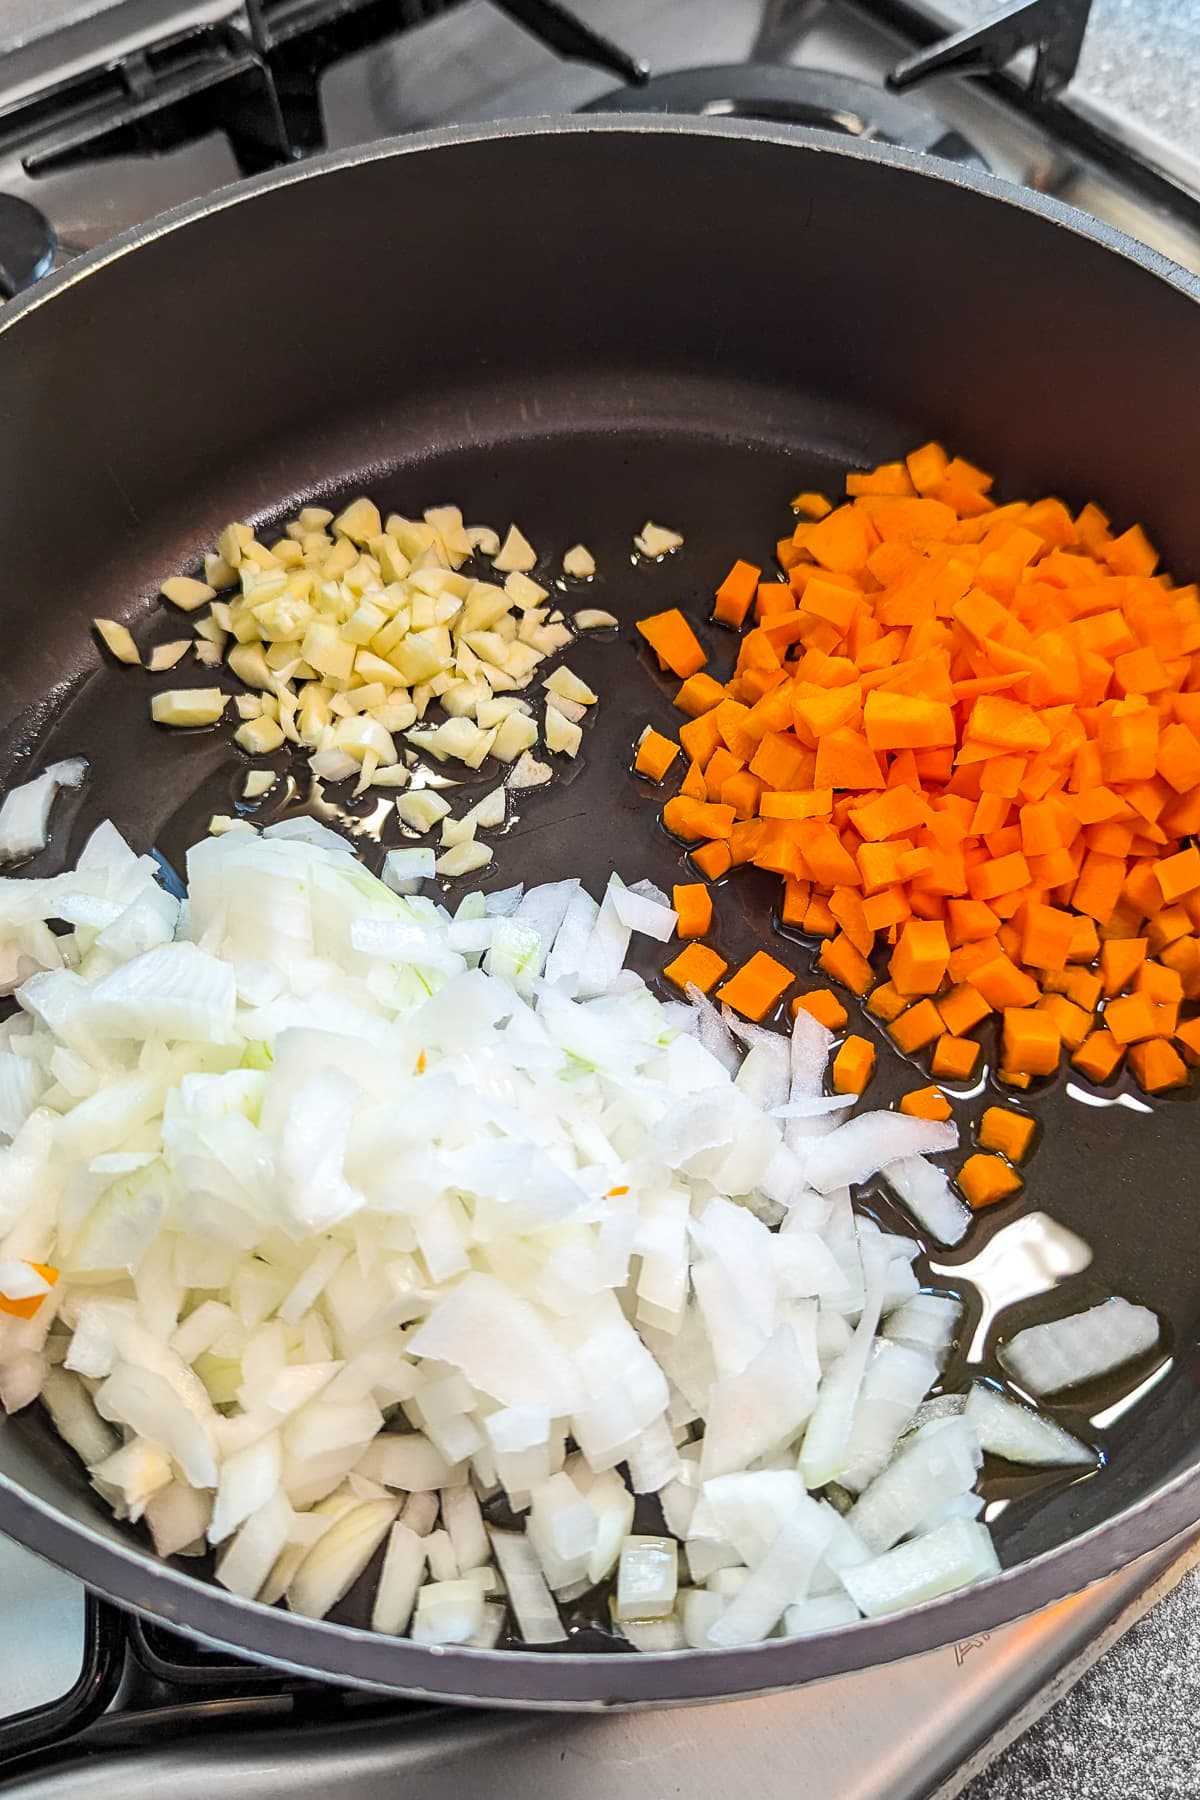 Frying chopped onions, carrots and garlic in a frying pan on the stove.